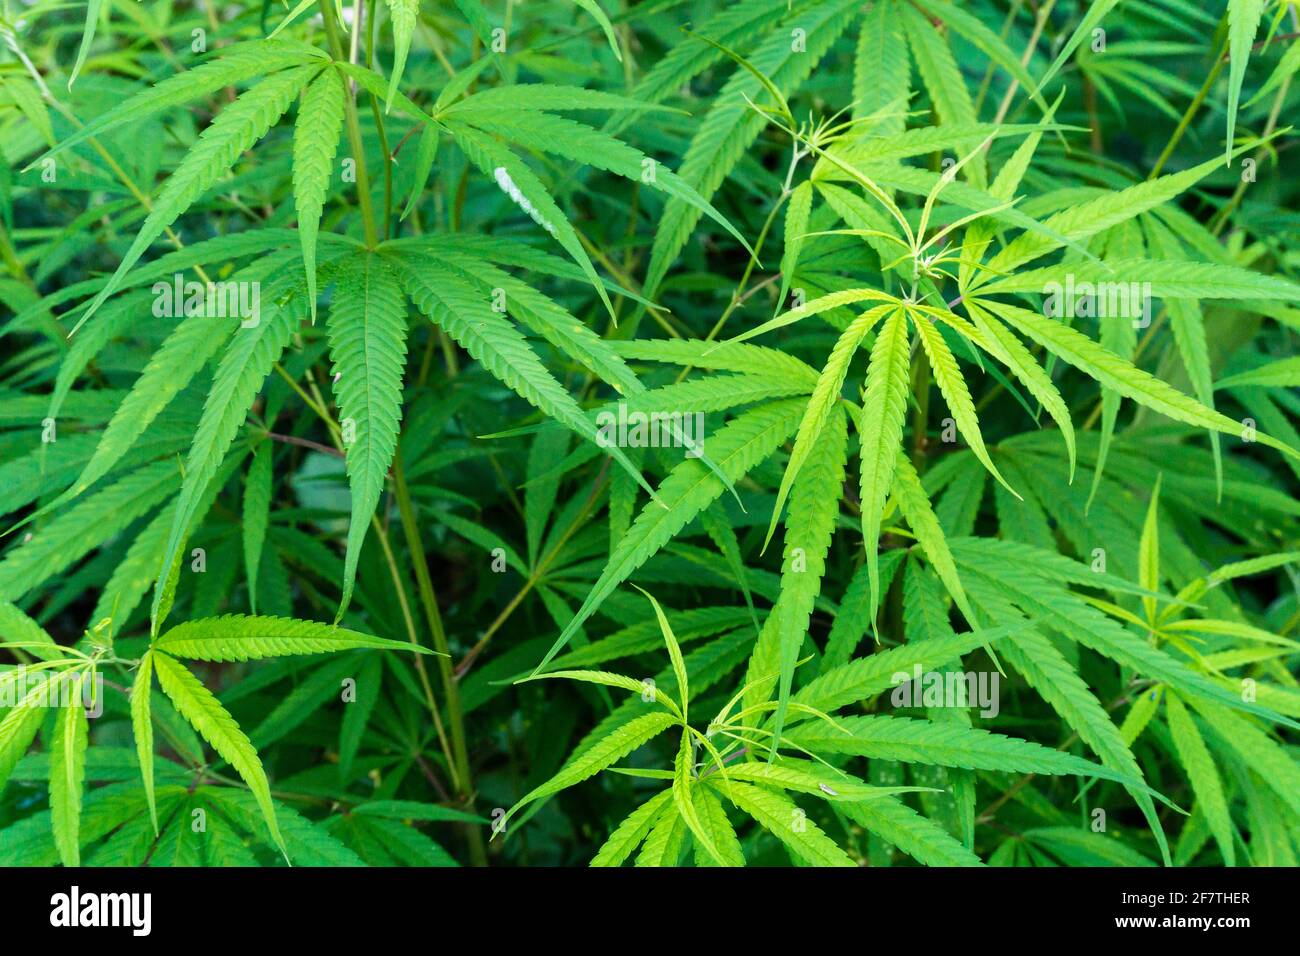 A close up shot of cannabis leaves and bud. Stock Photo